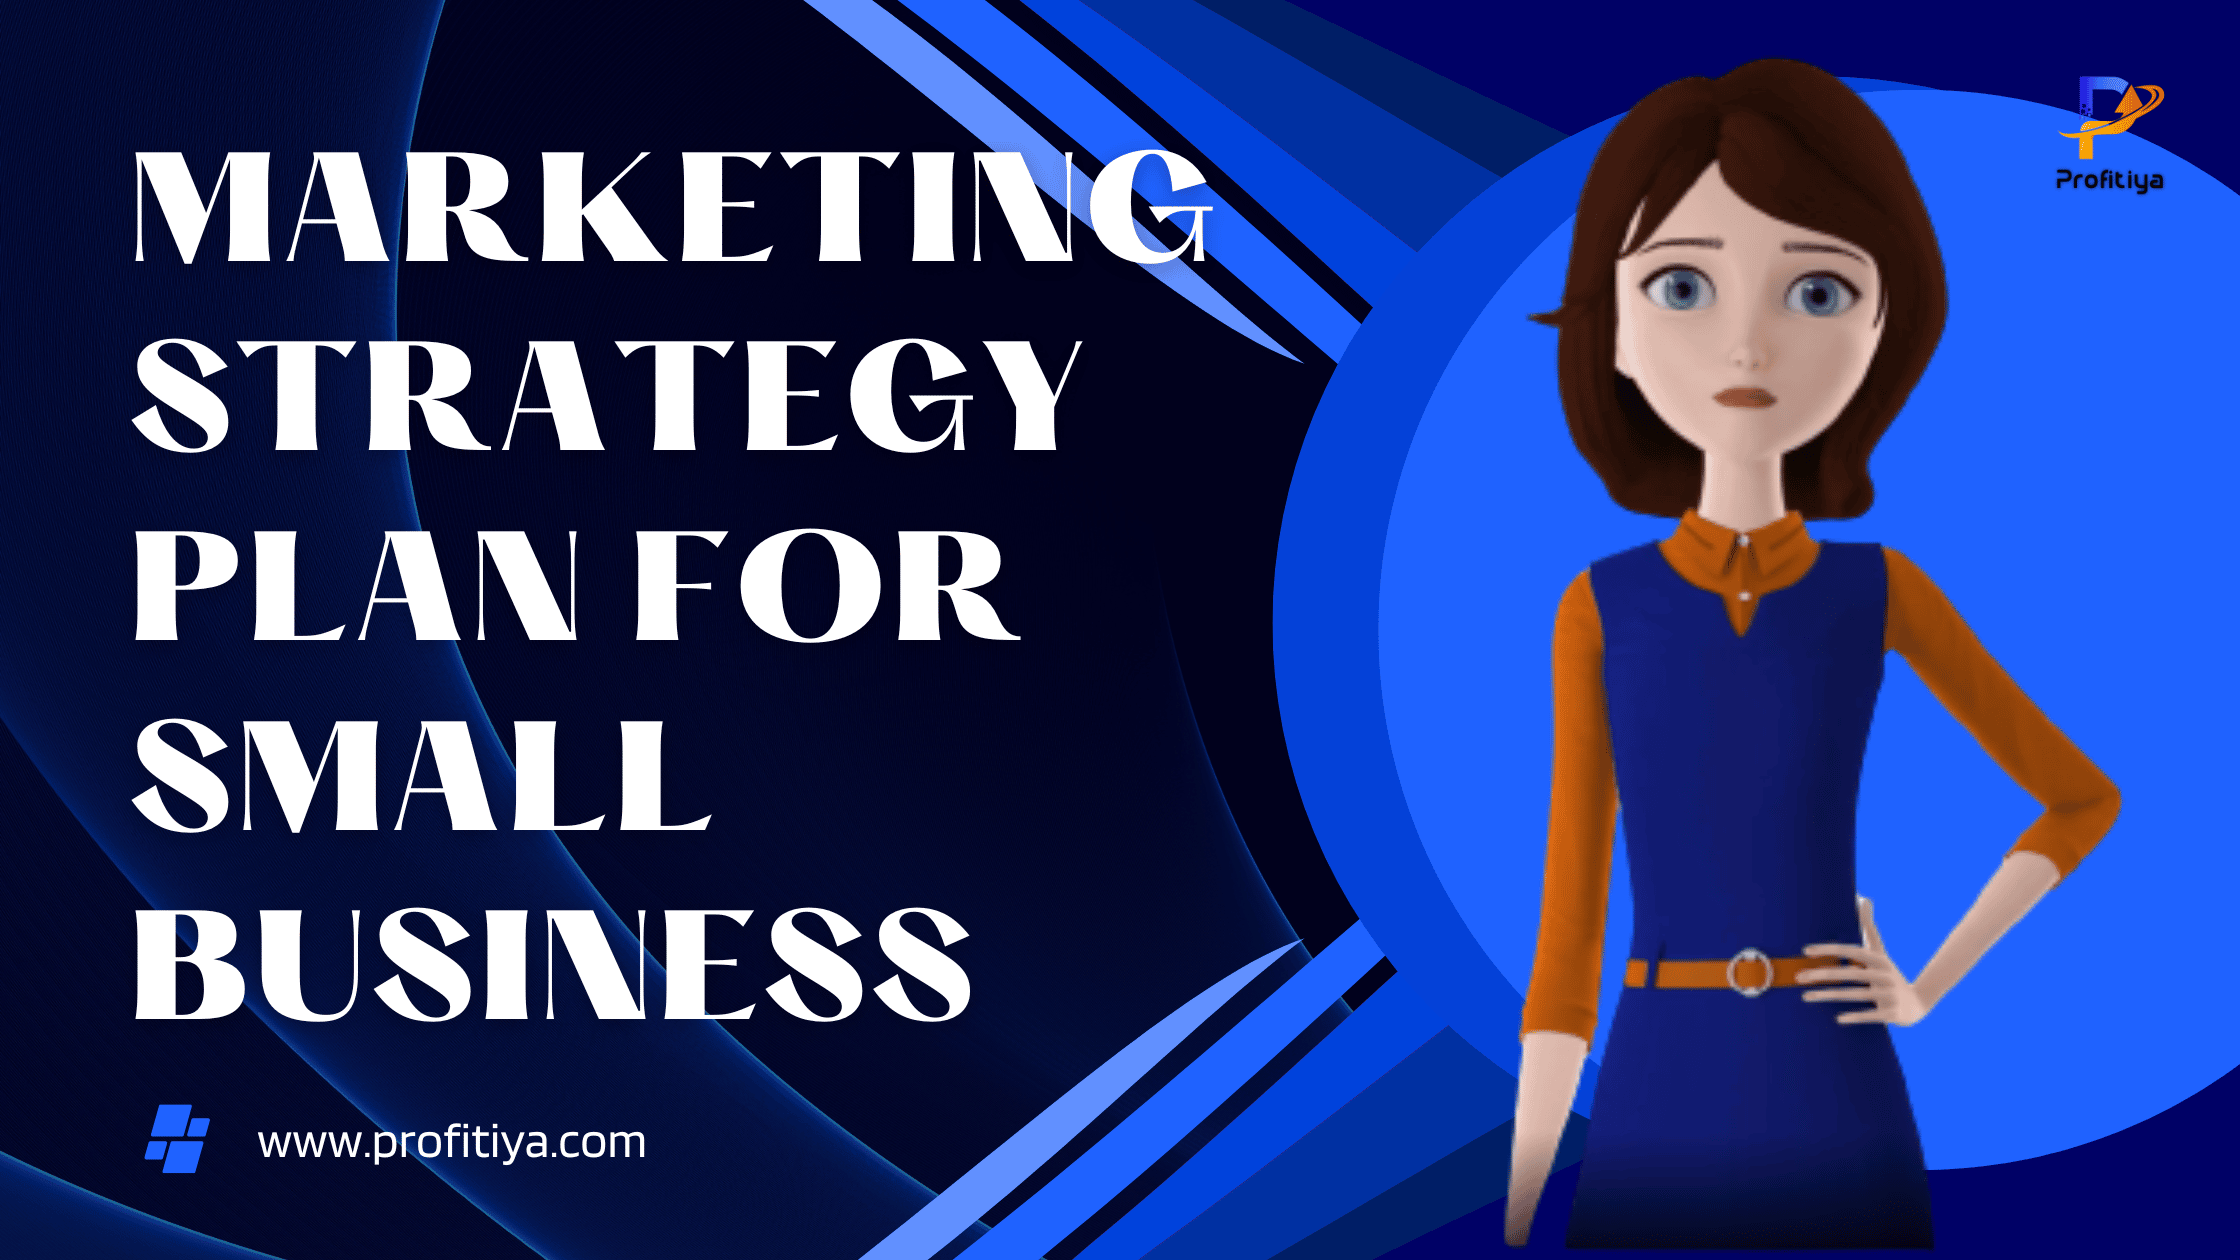 Marketing Strategy Plan For Small Business